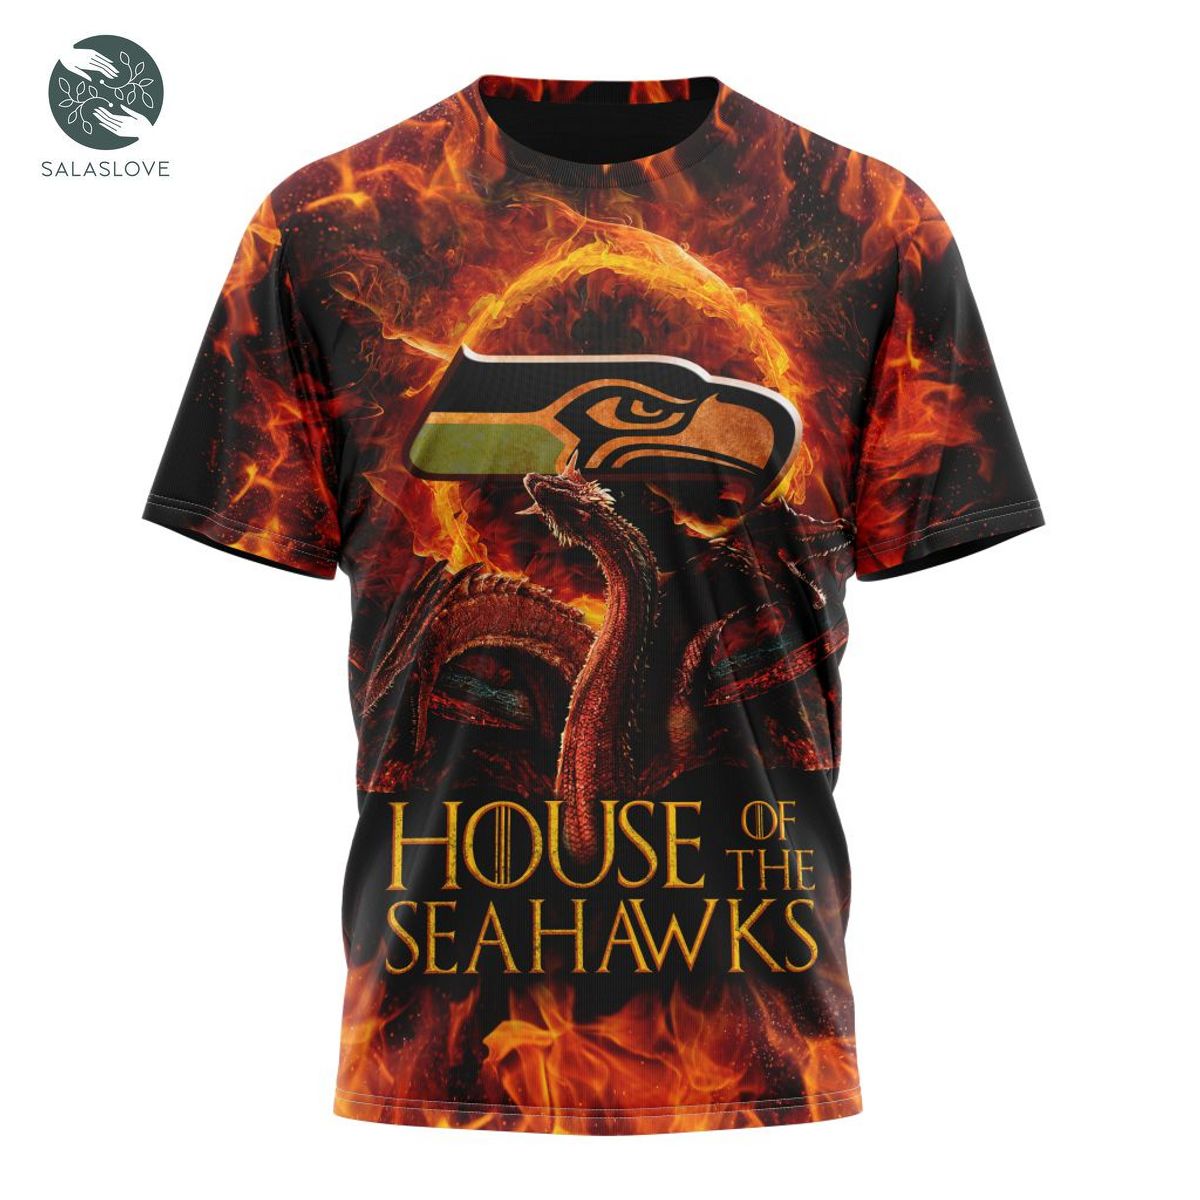 NFL Seattle Seahawks GAME OF THRONES – HOUSE OF THE SEAHAWKS Shirt